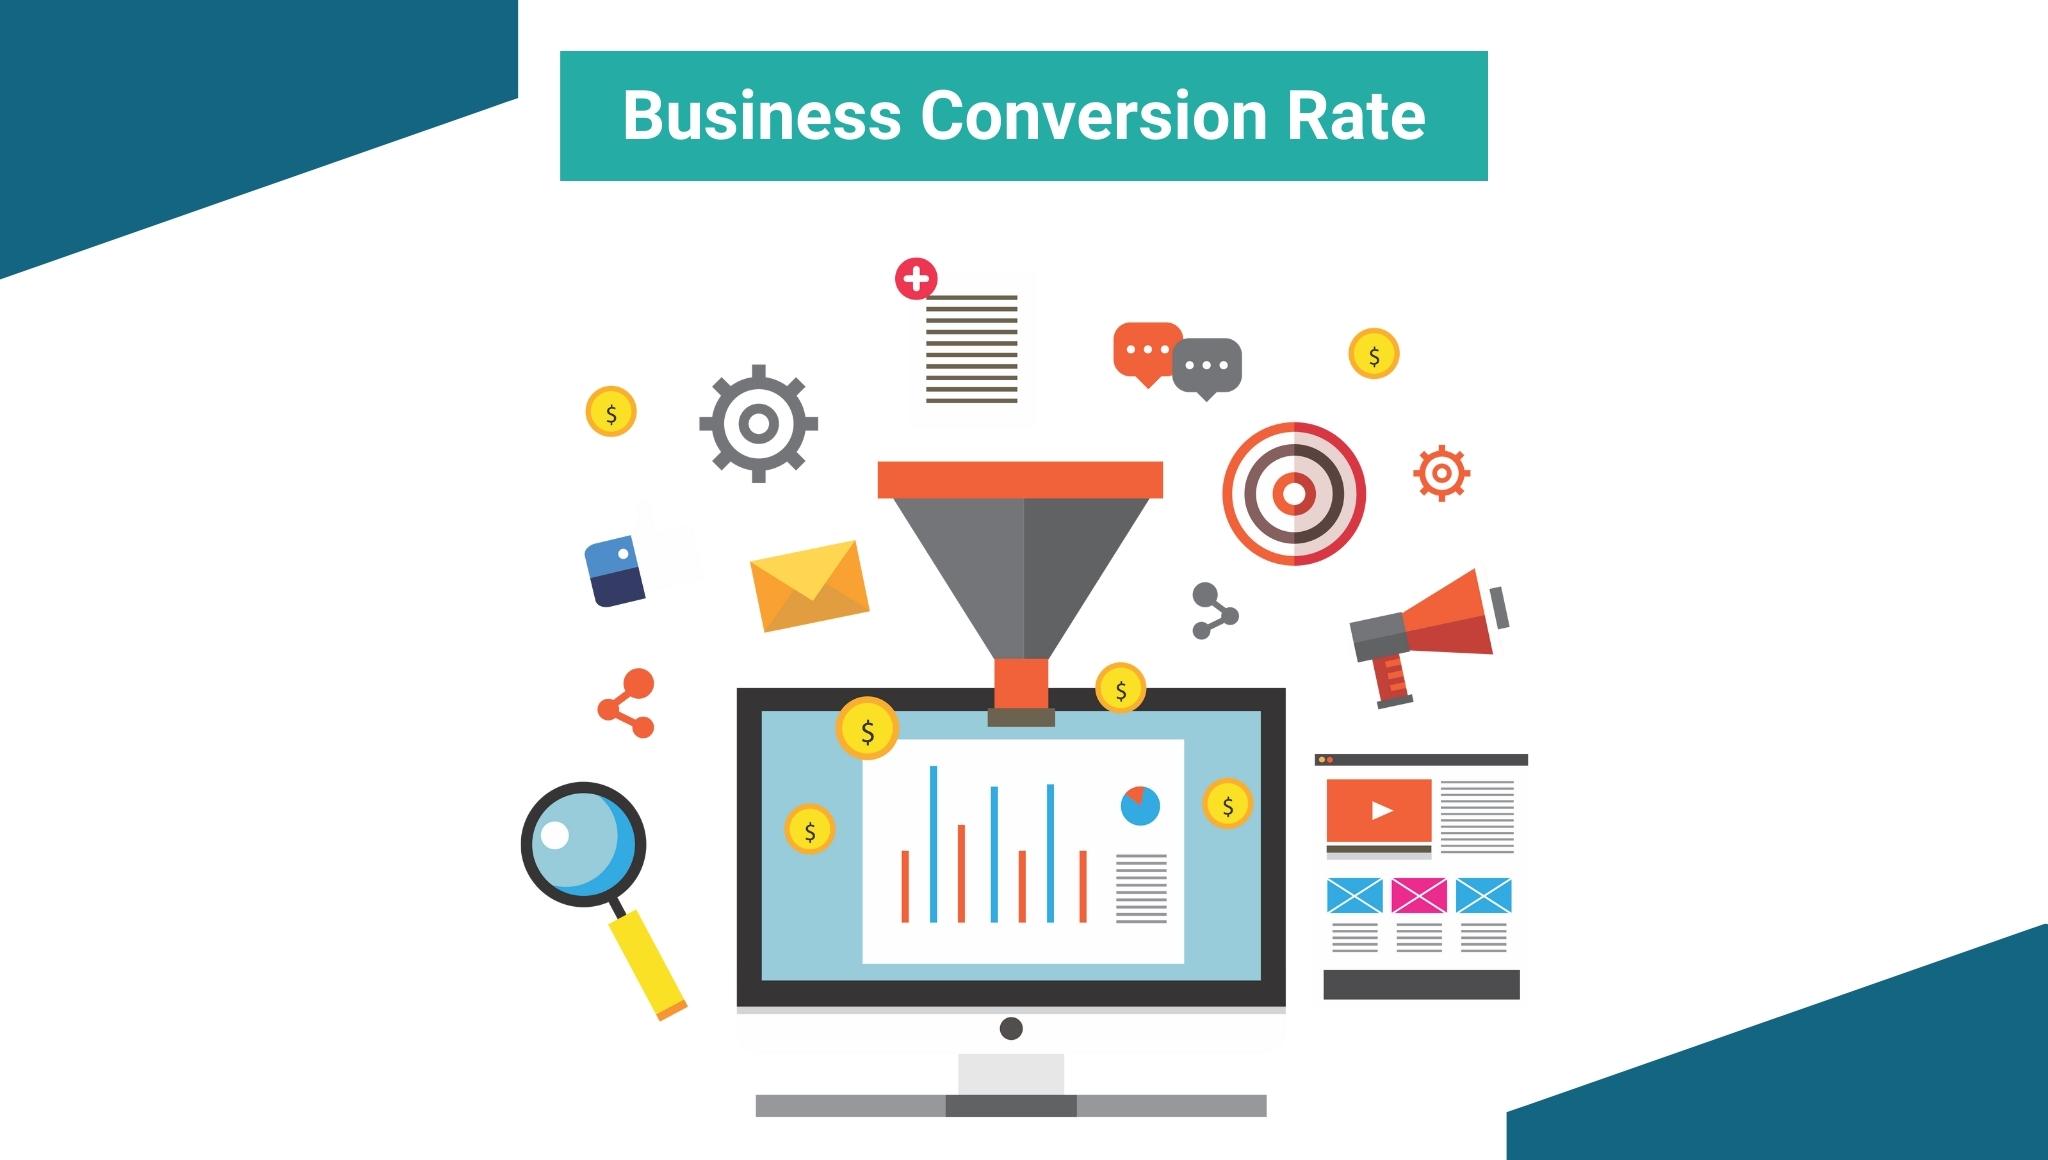 What is Business Conversion Rate?